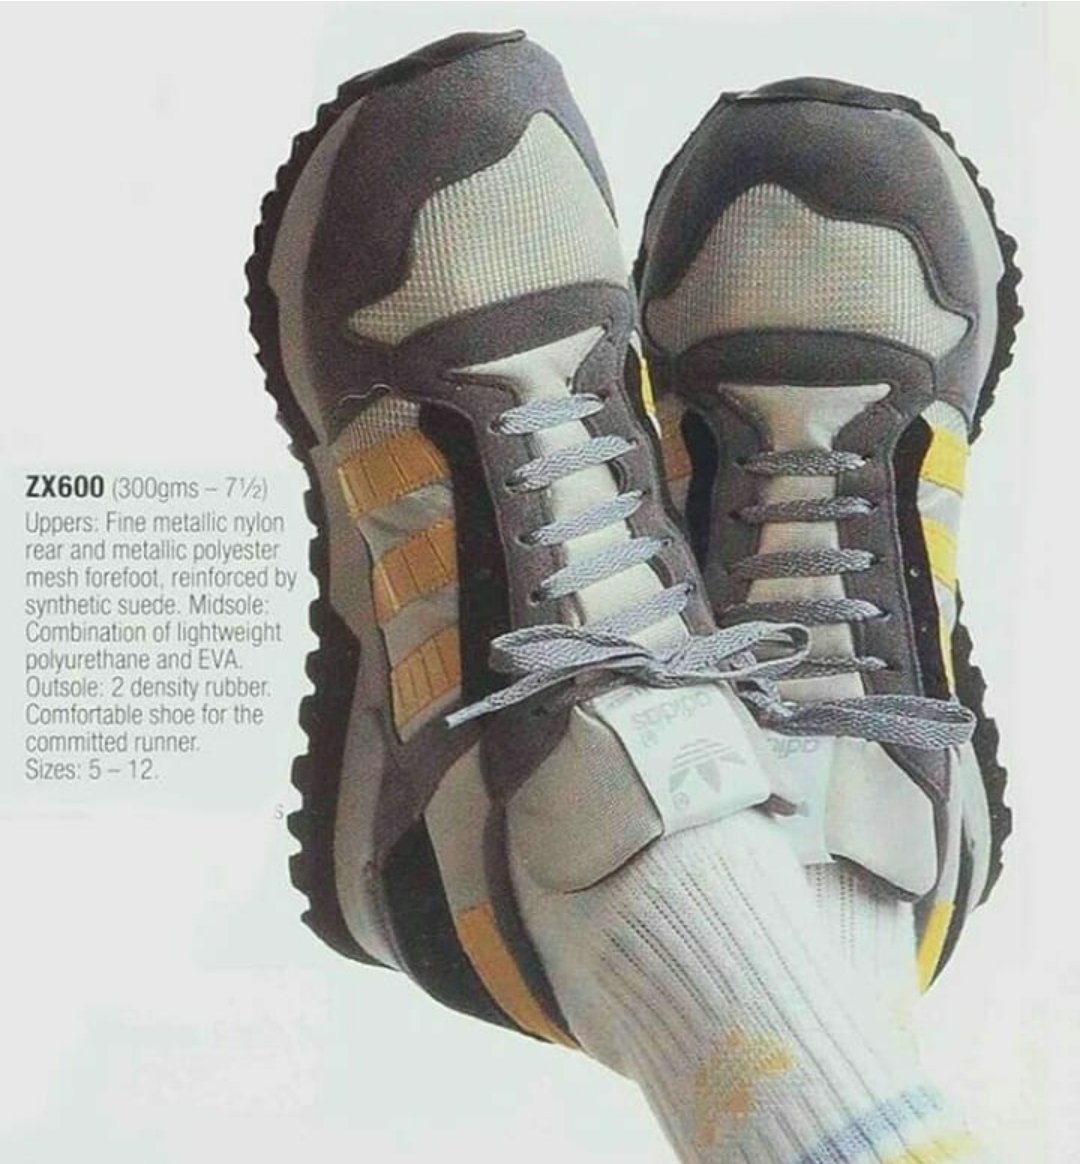 zx600 trainers